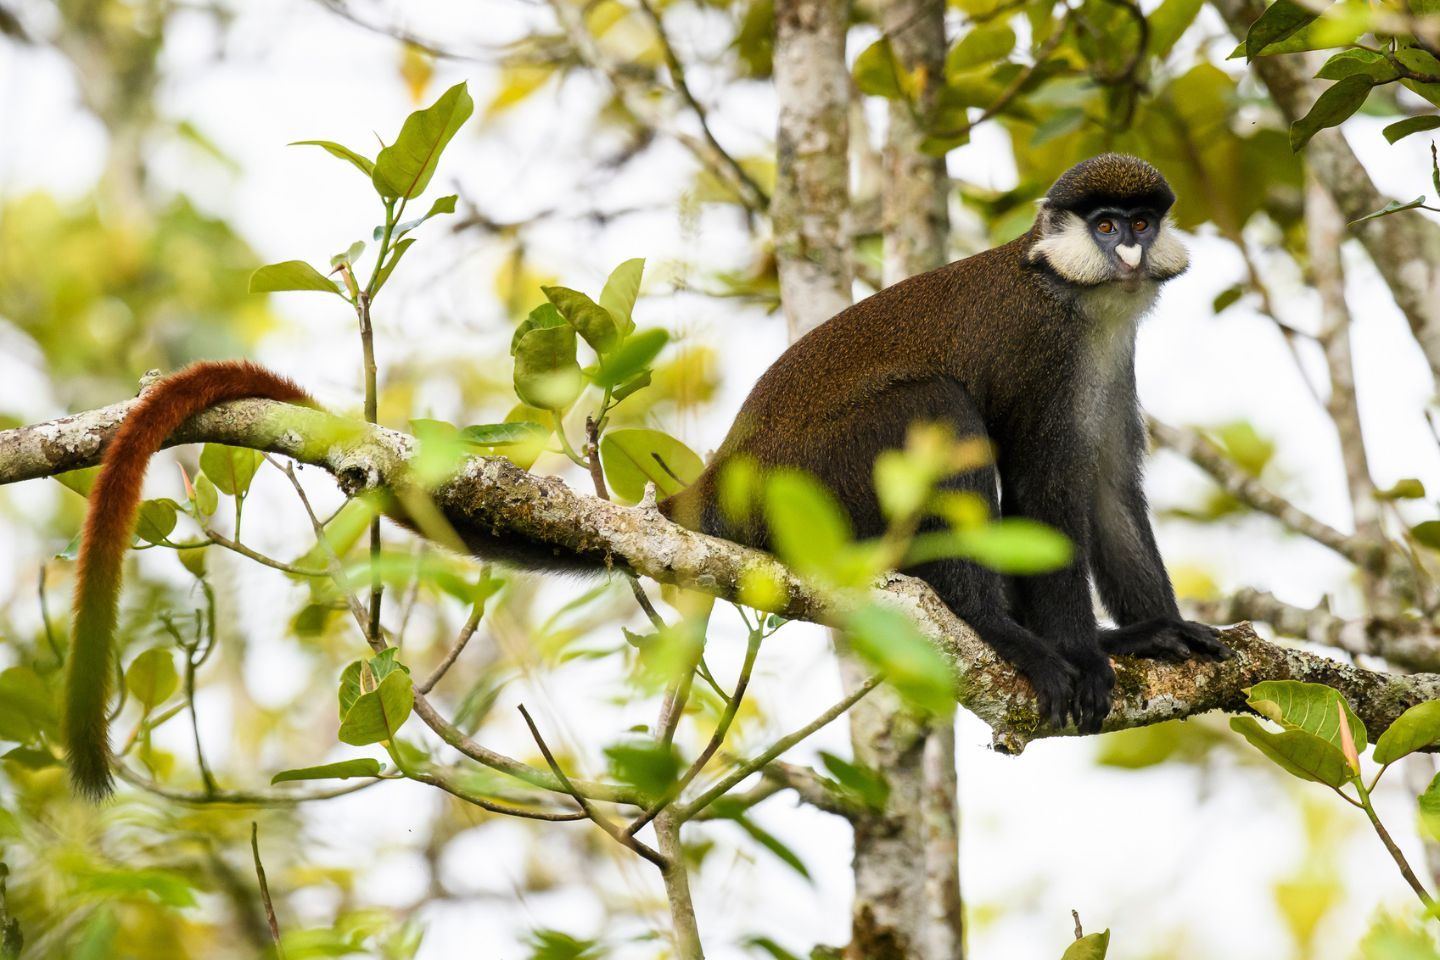 In Search Of Gold: Golden Monkey Tracking in Uganda